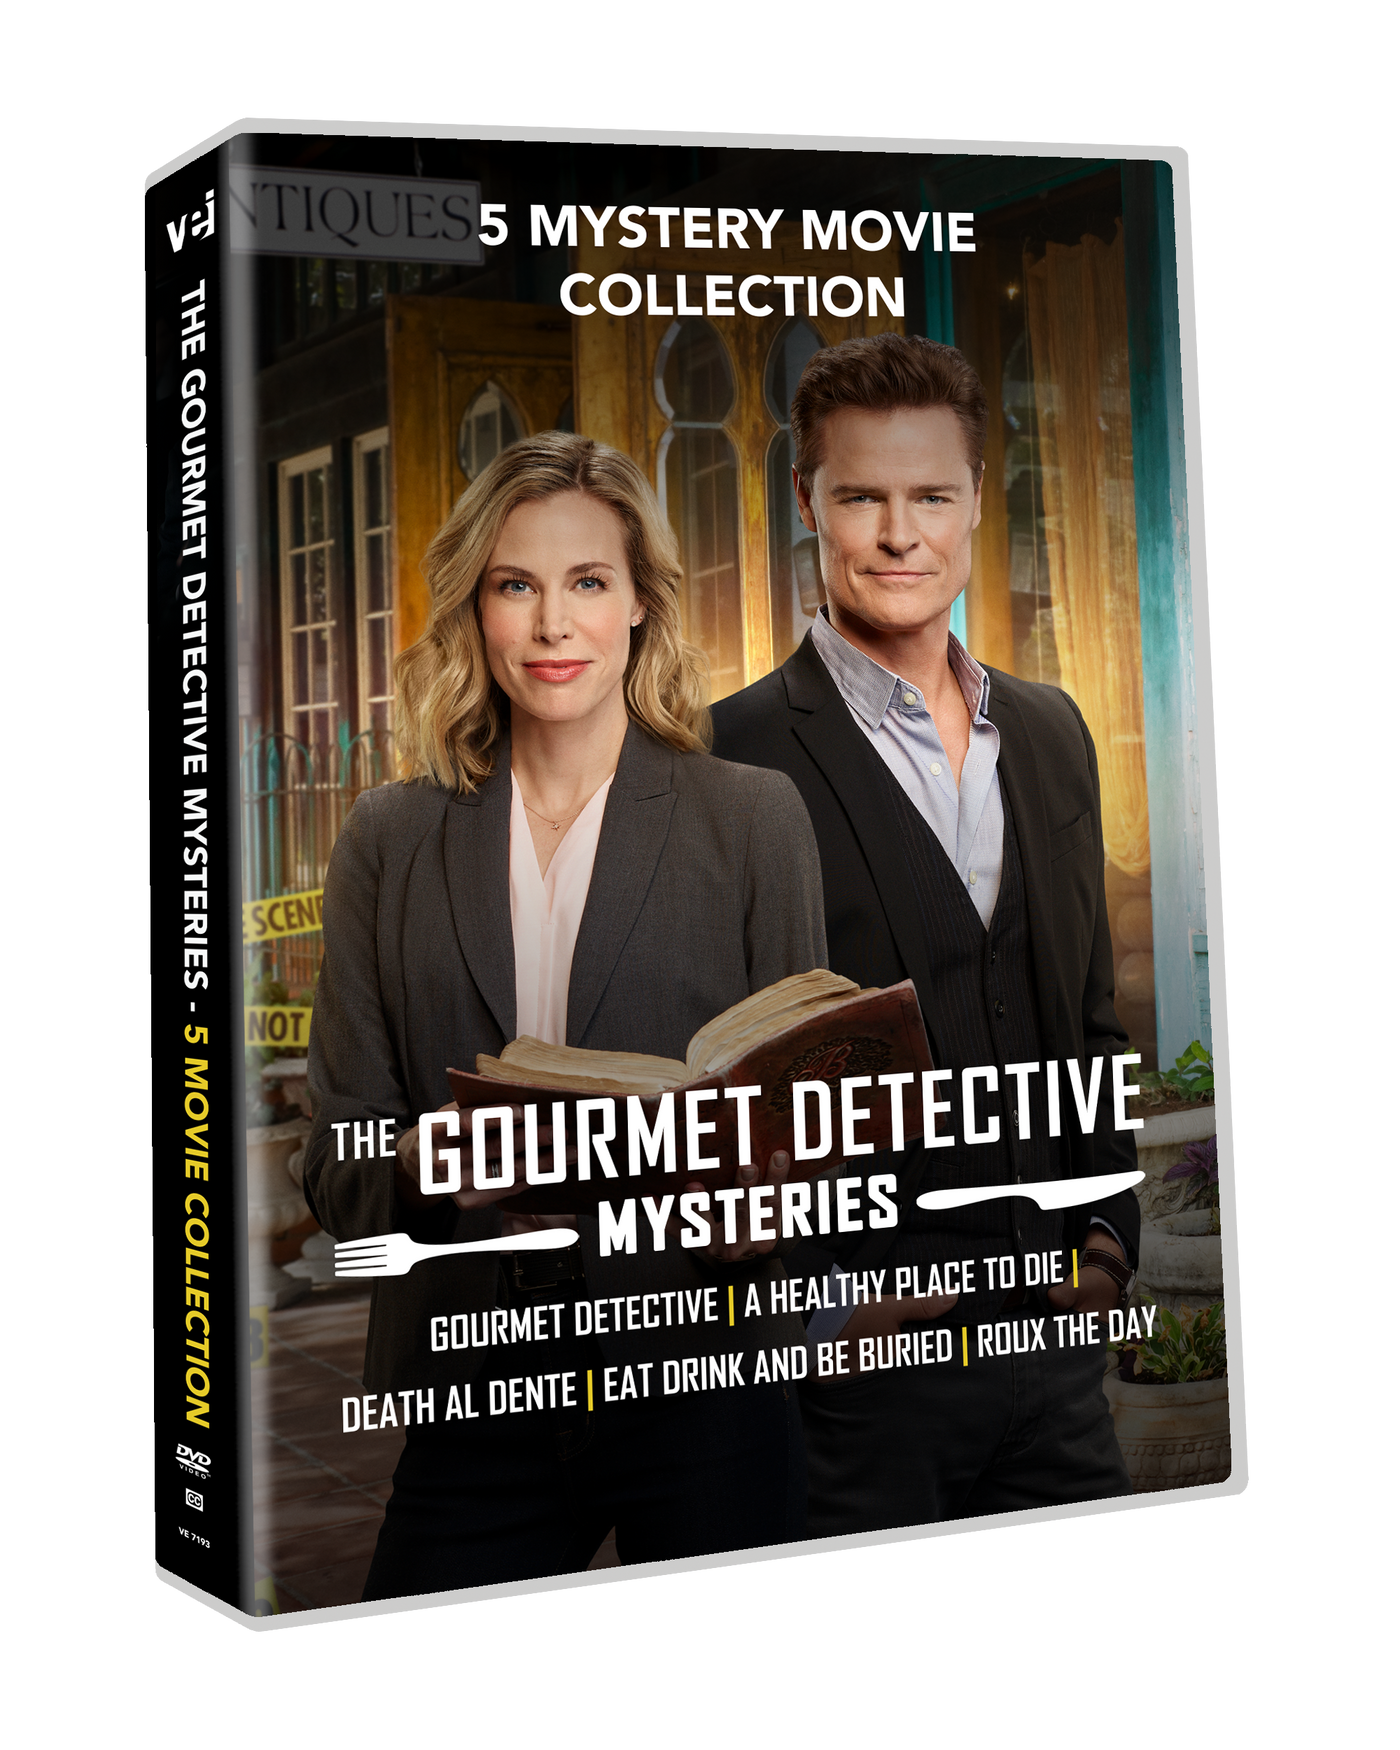 [DVD]　Gourmet　Collection　The　Entertainment　#7193　Detective　Inc　–　Mysteries　Movie　Visual